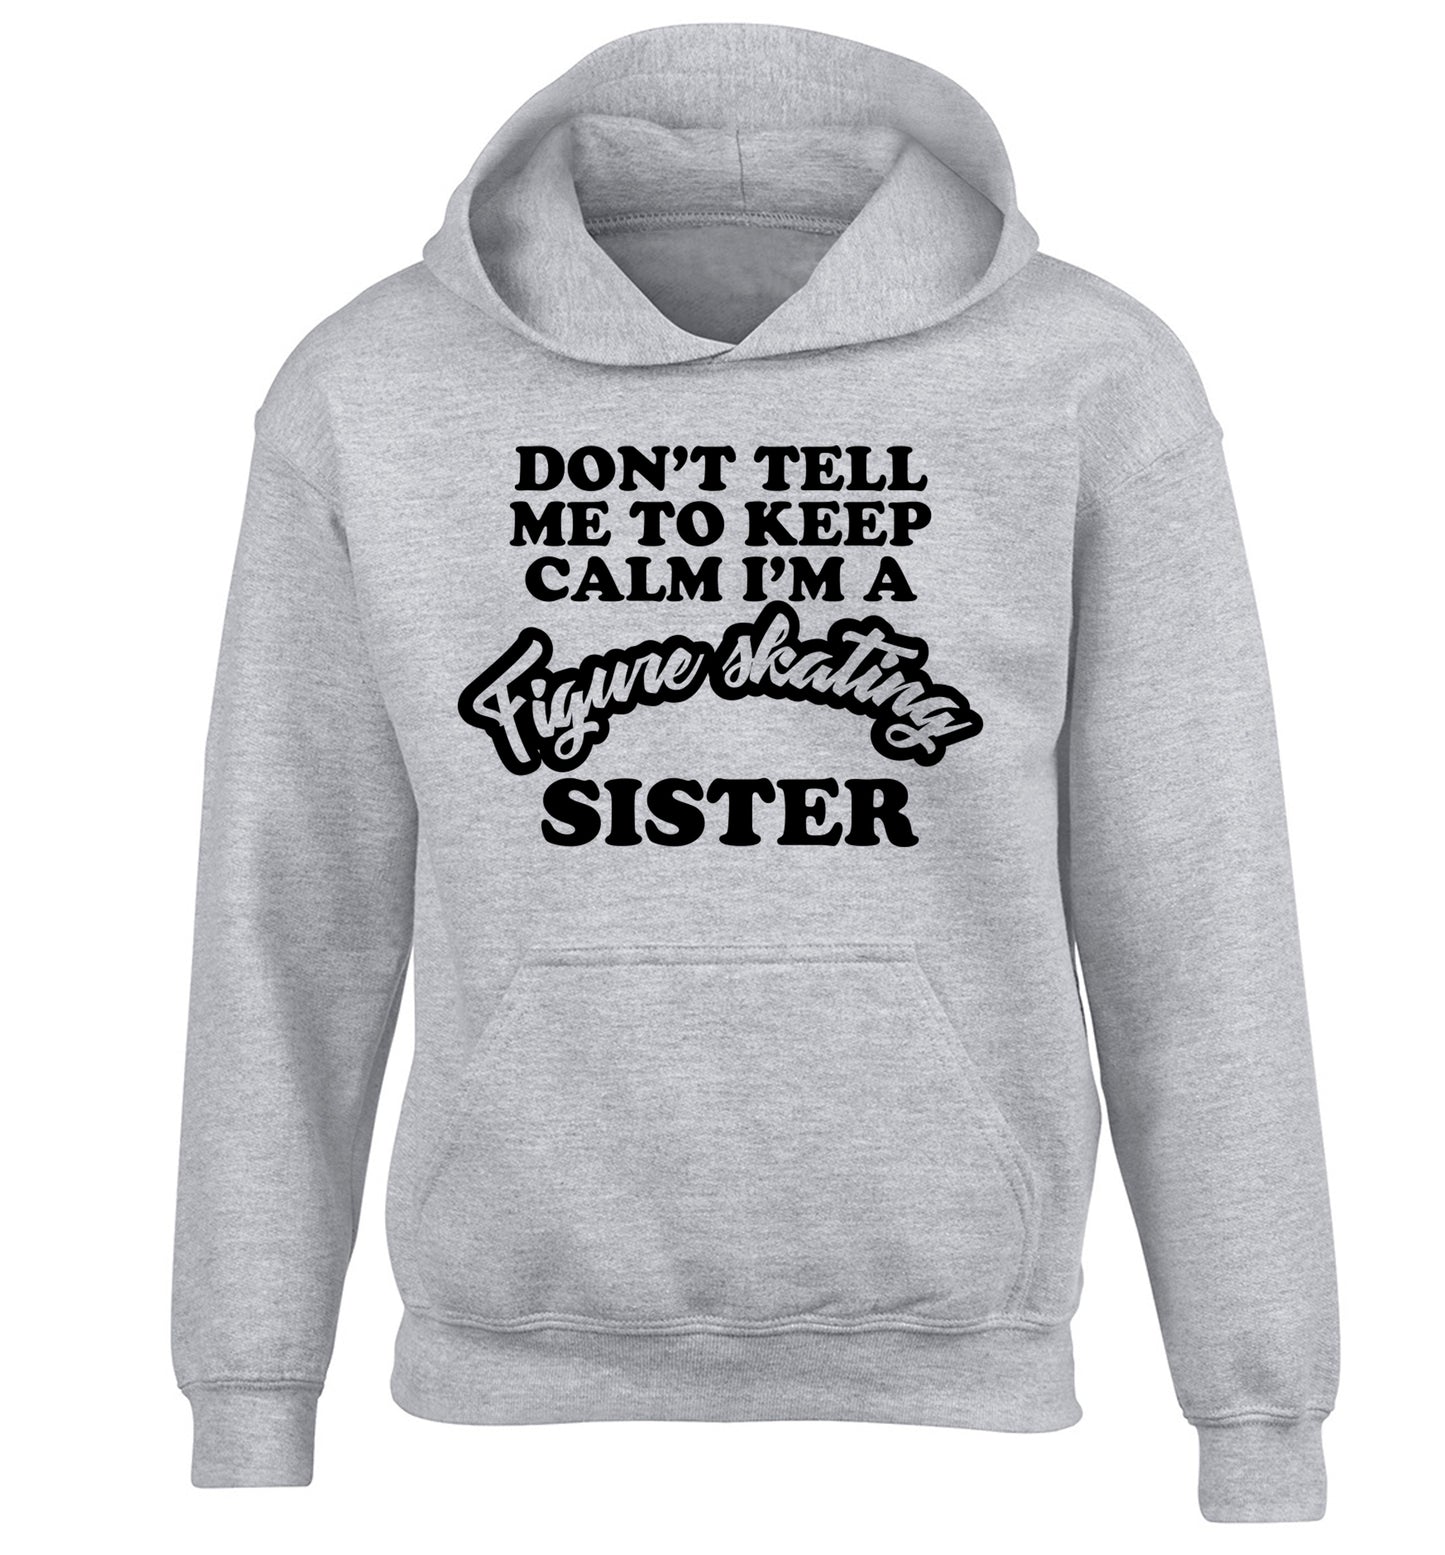 Don't tell me to keep calm I'm a figure skating sister children's grey hoodie 12-14 Years